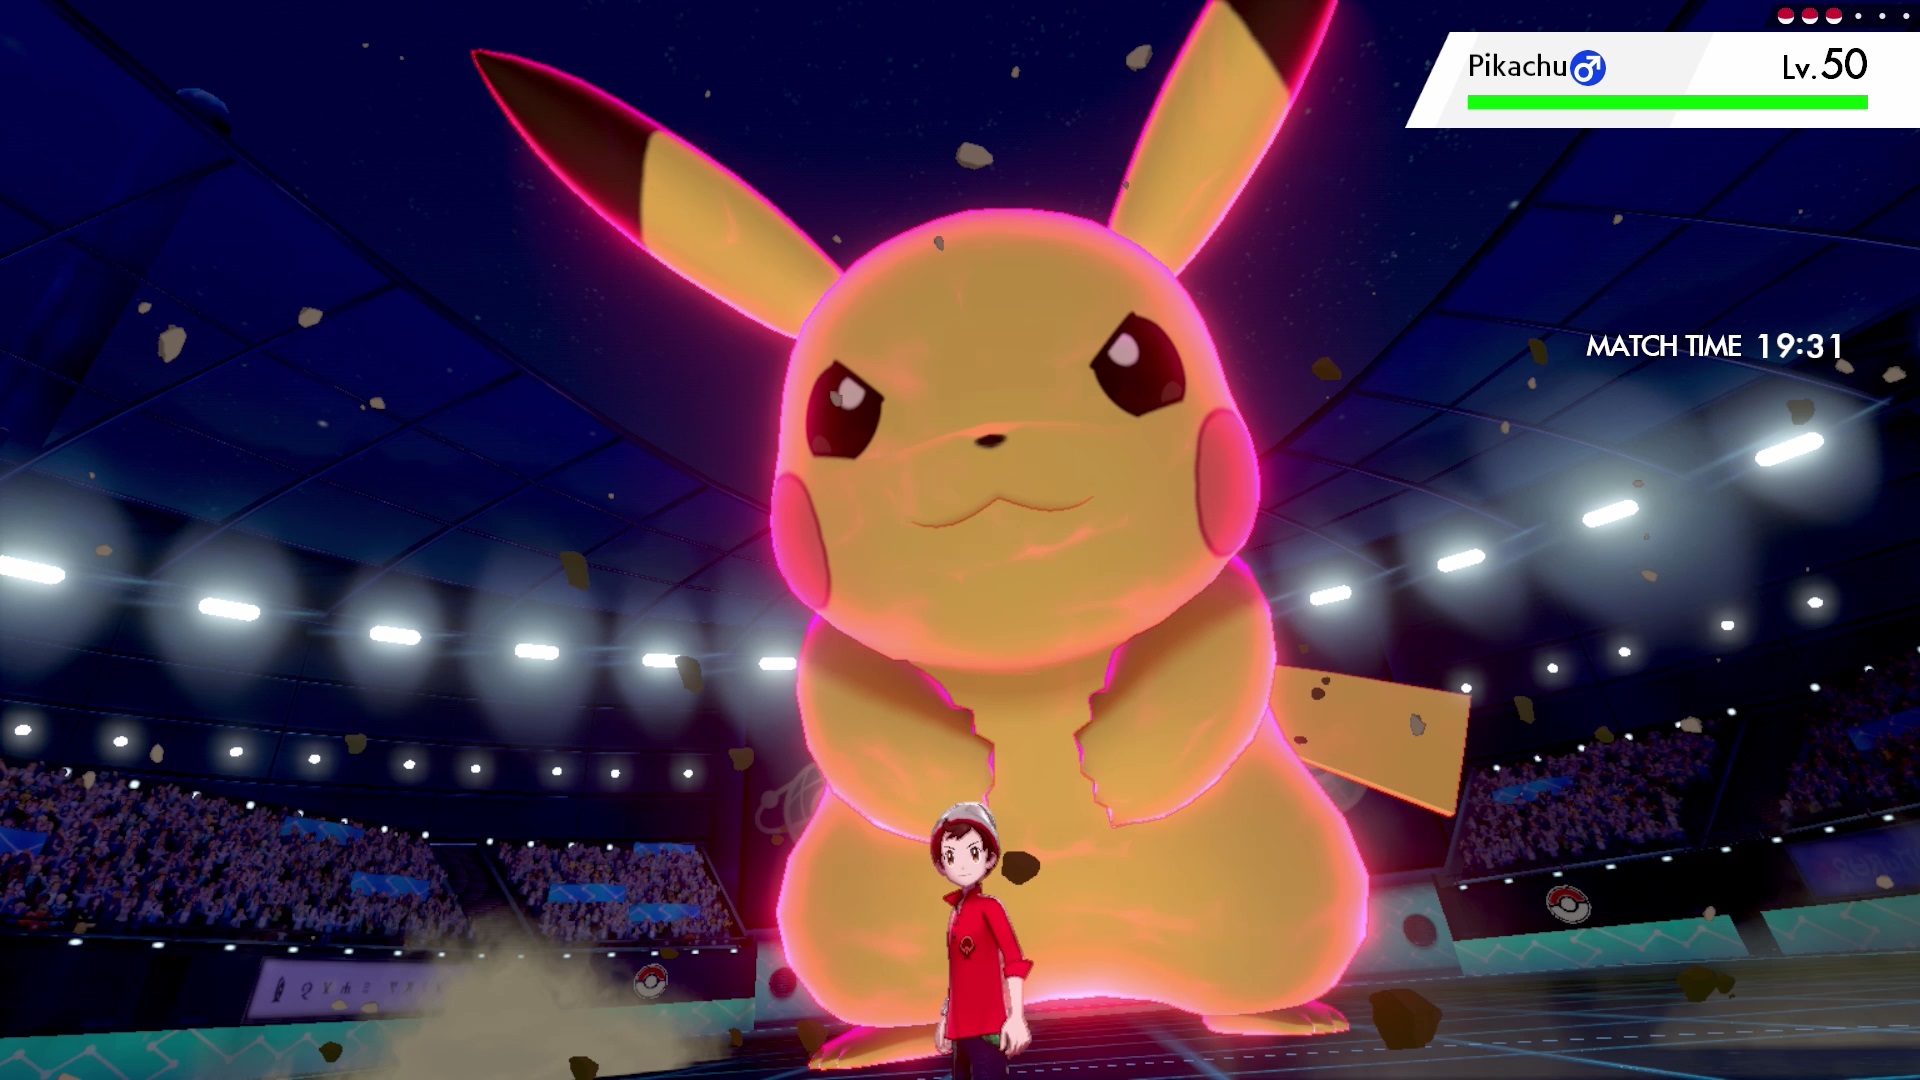 Pokémon Sword and Shield review: A big adventure with a small